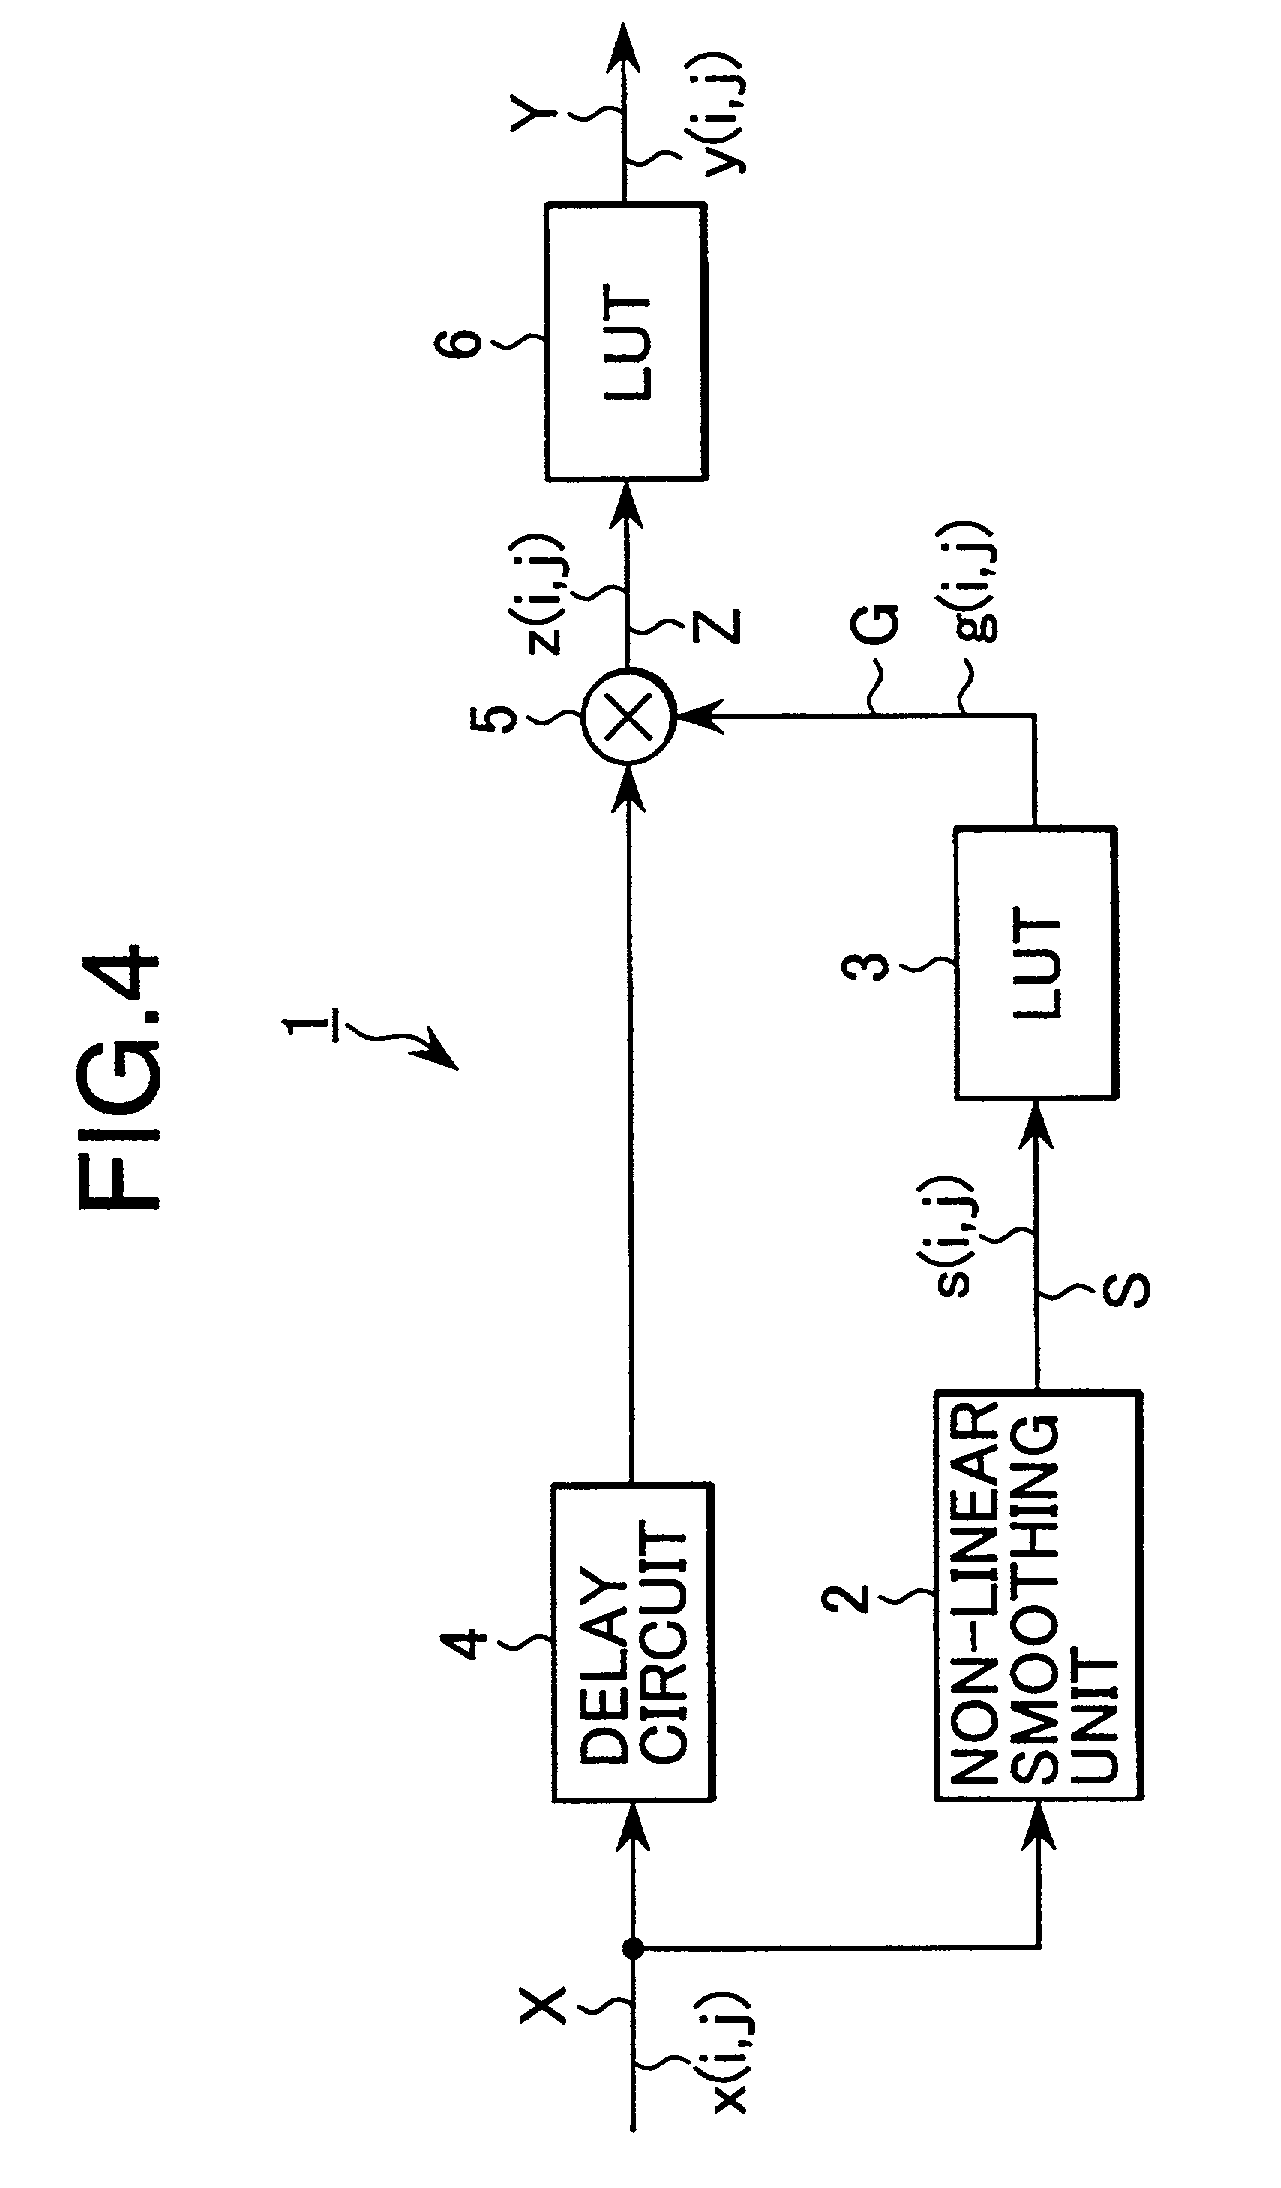 Image processing circuit and method for processing image